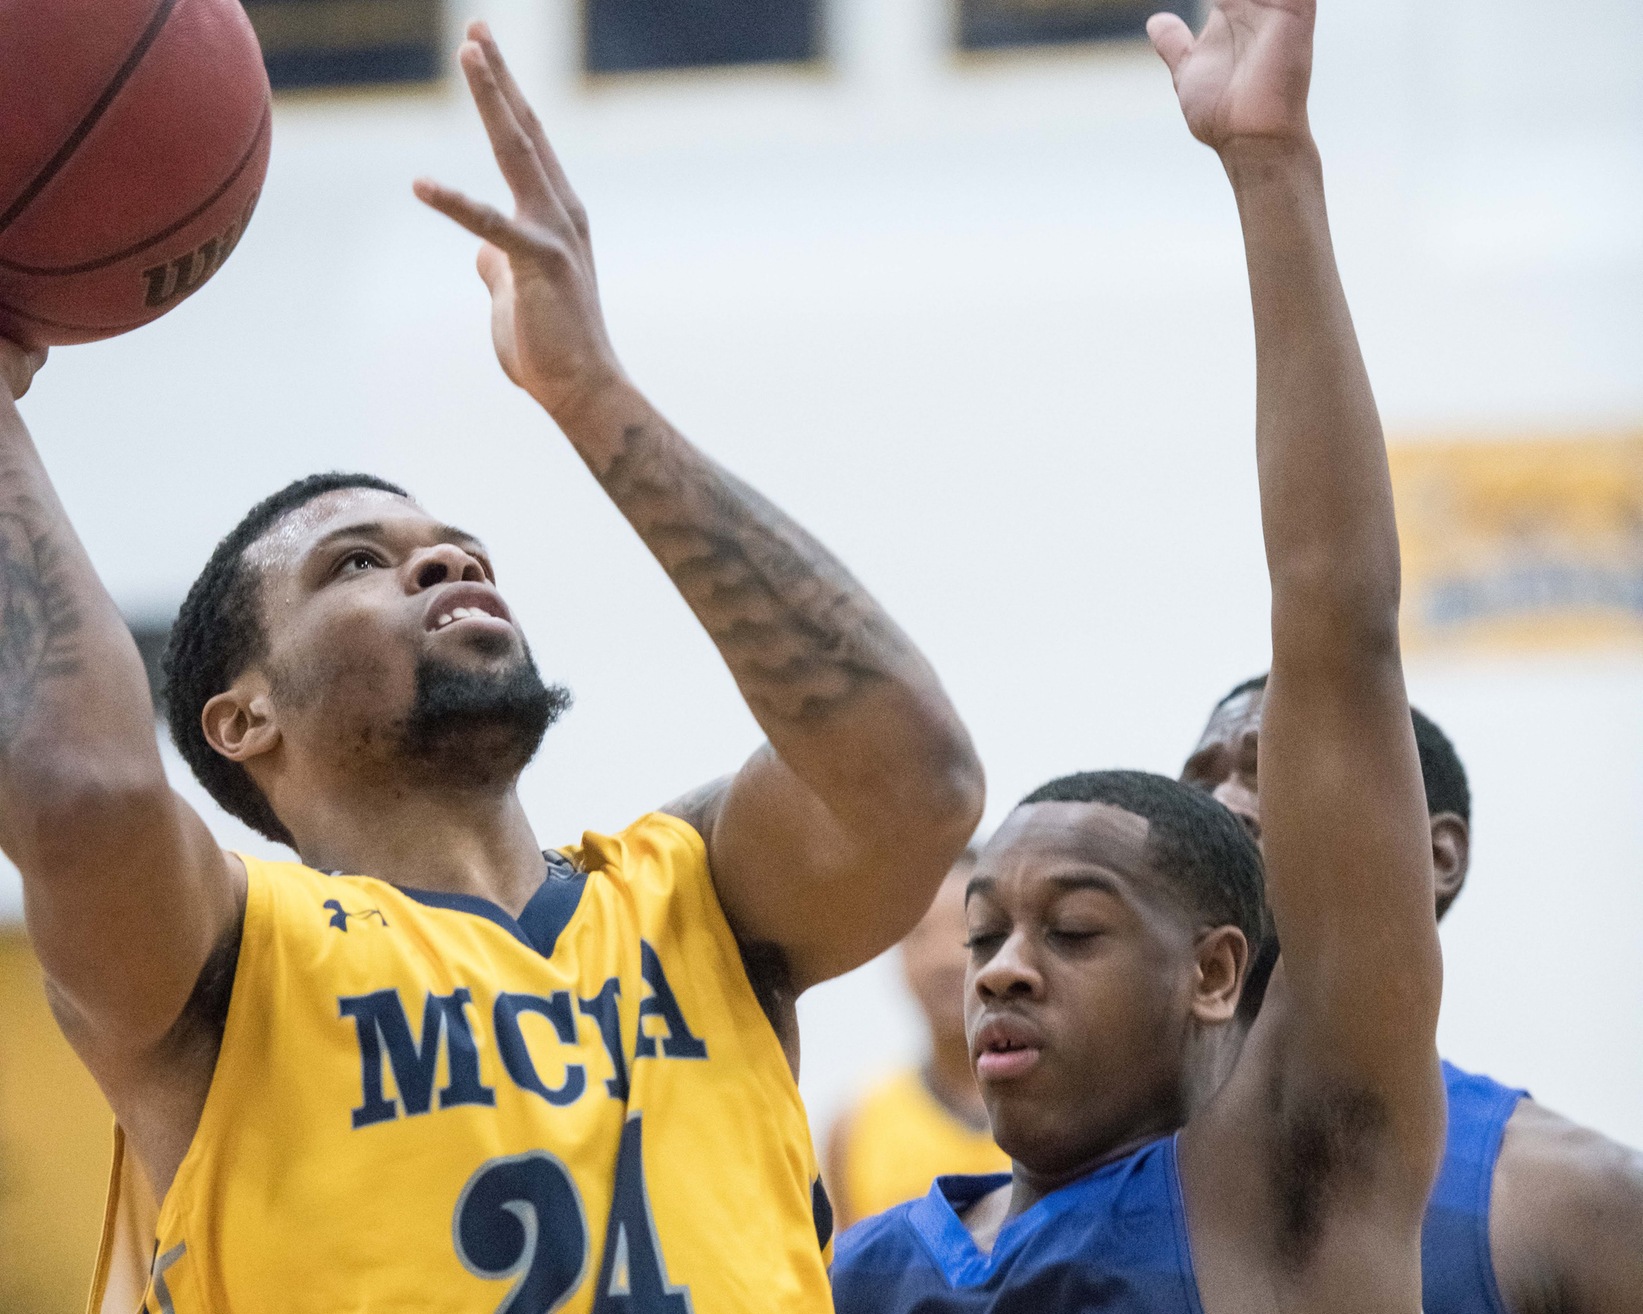 Men's Basketball tripped up at Fitchburg 94-73